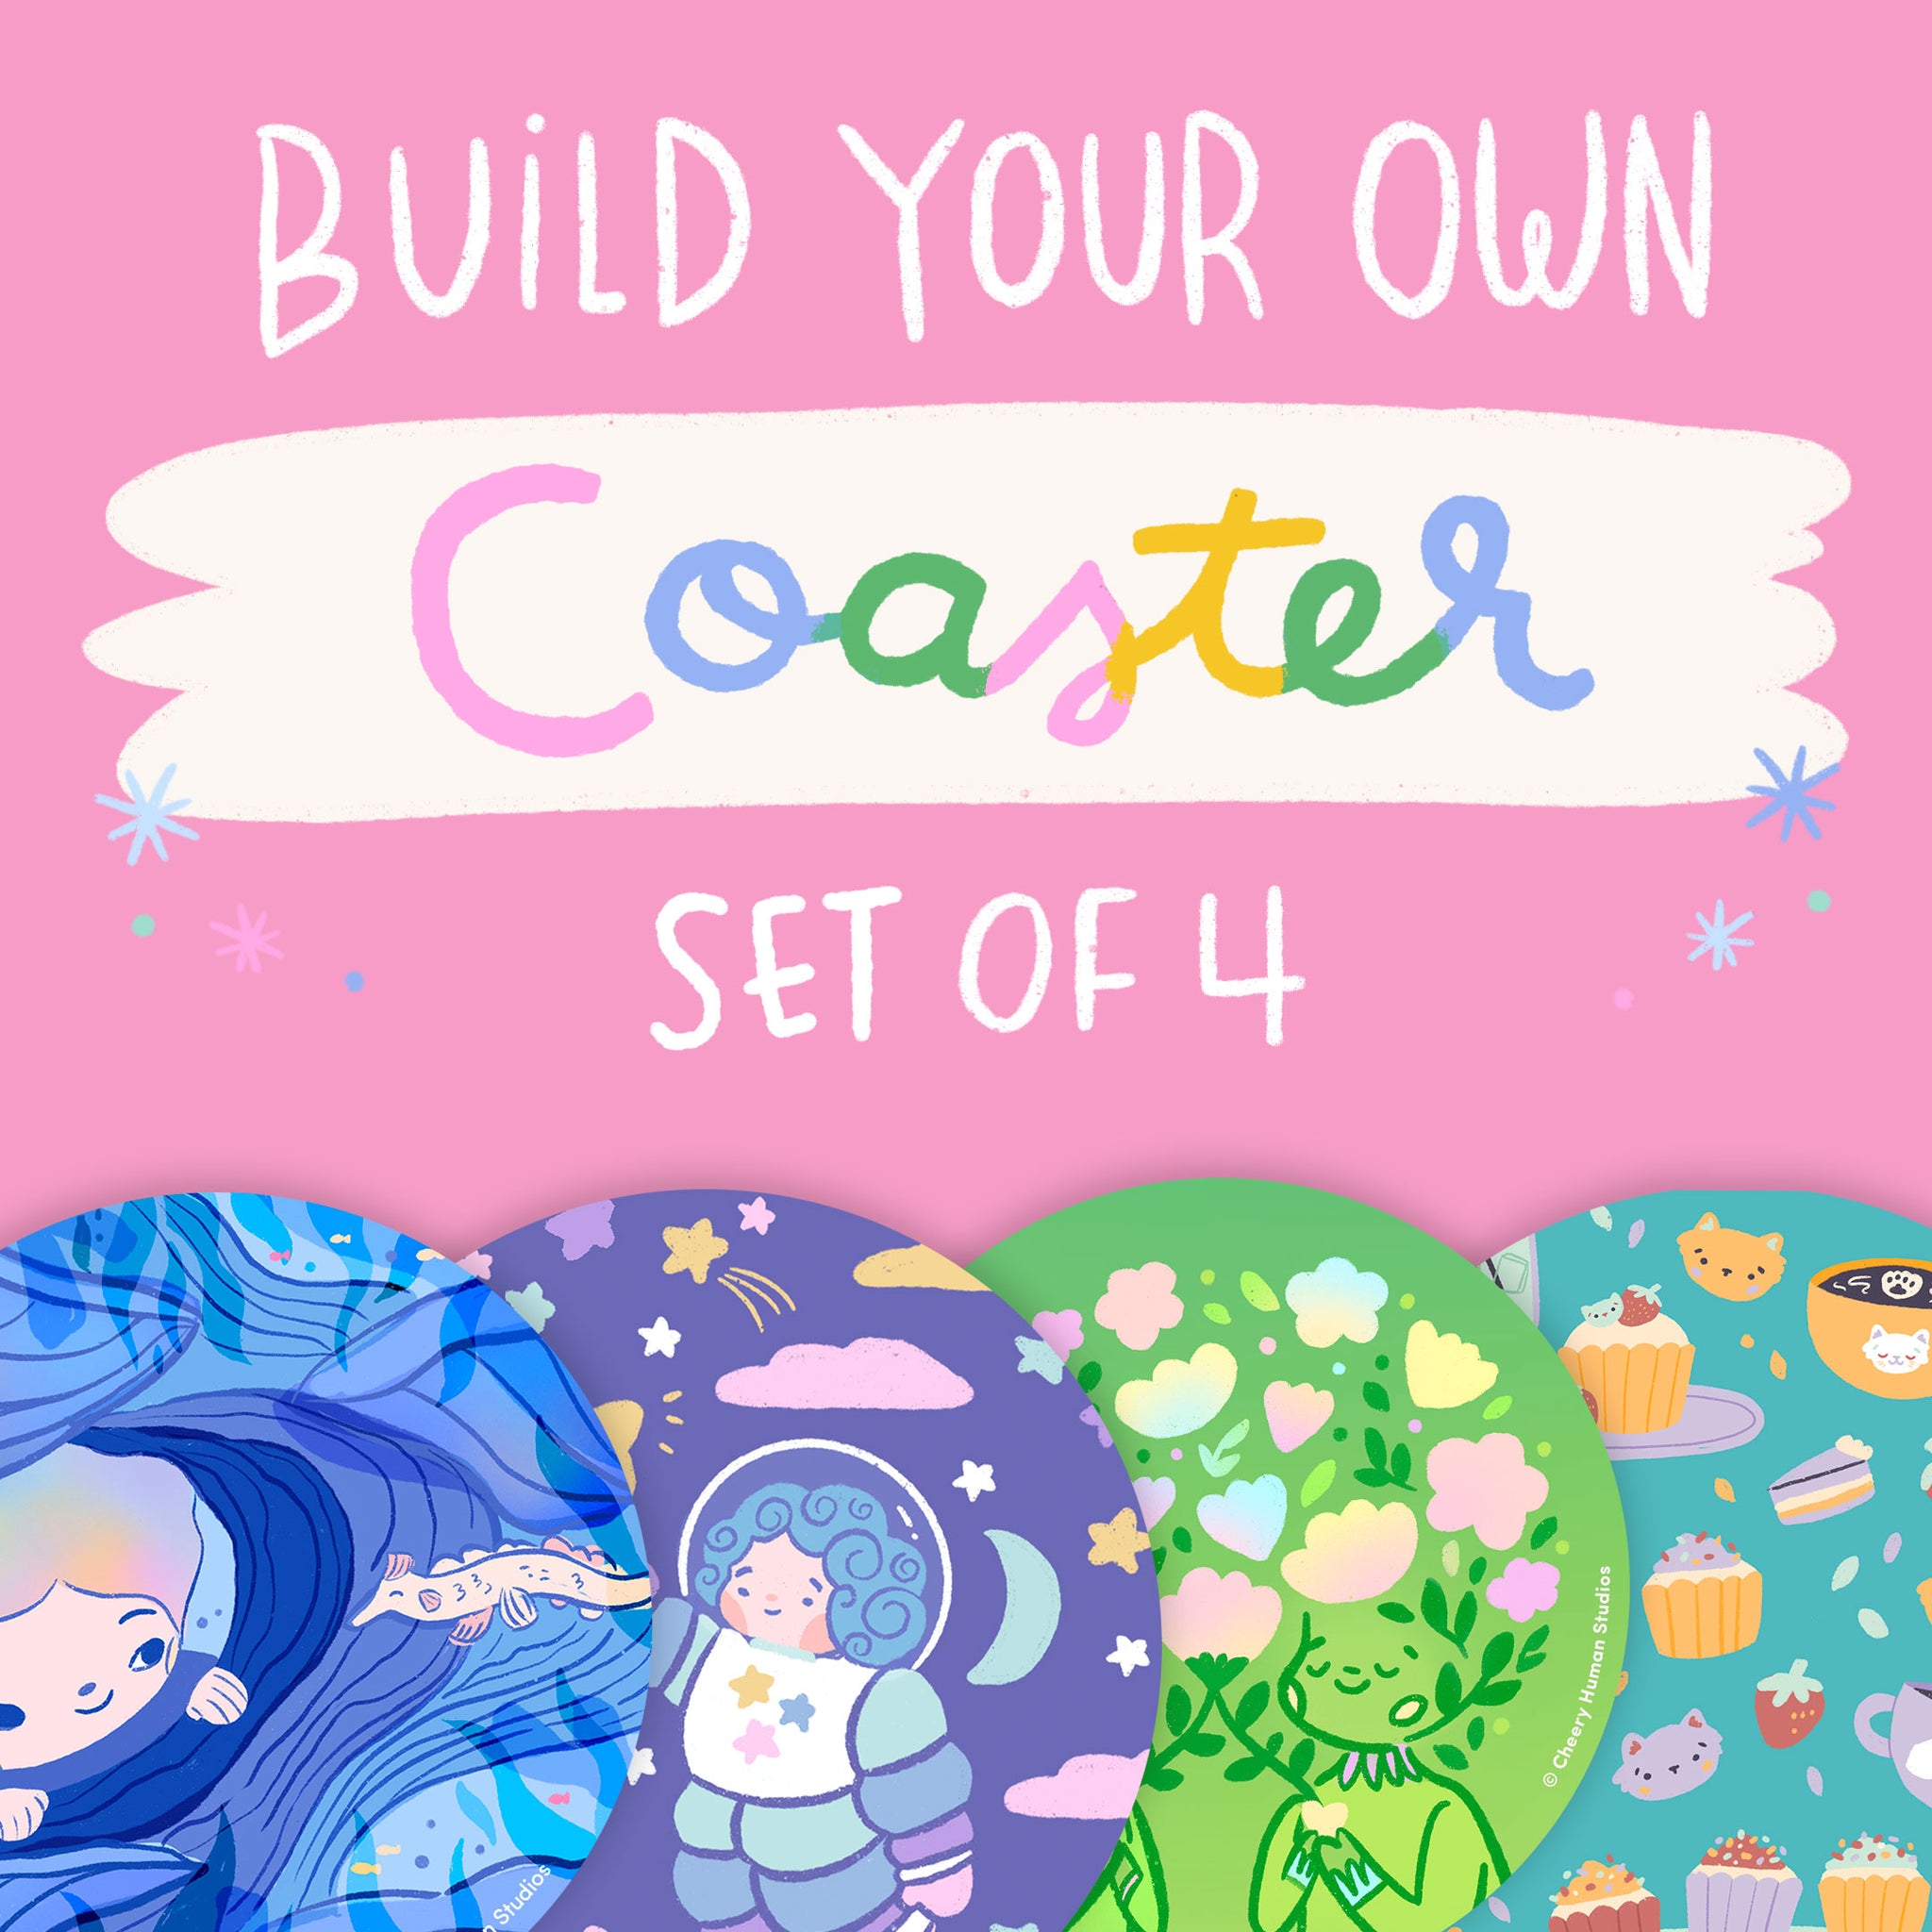 Build Your Own Coaster Set of 4 | Coasters